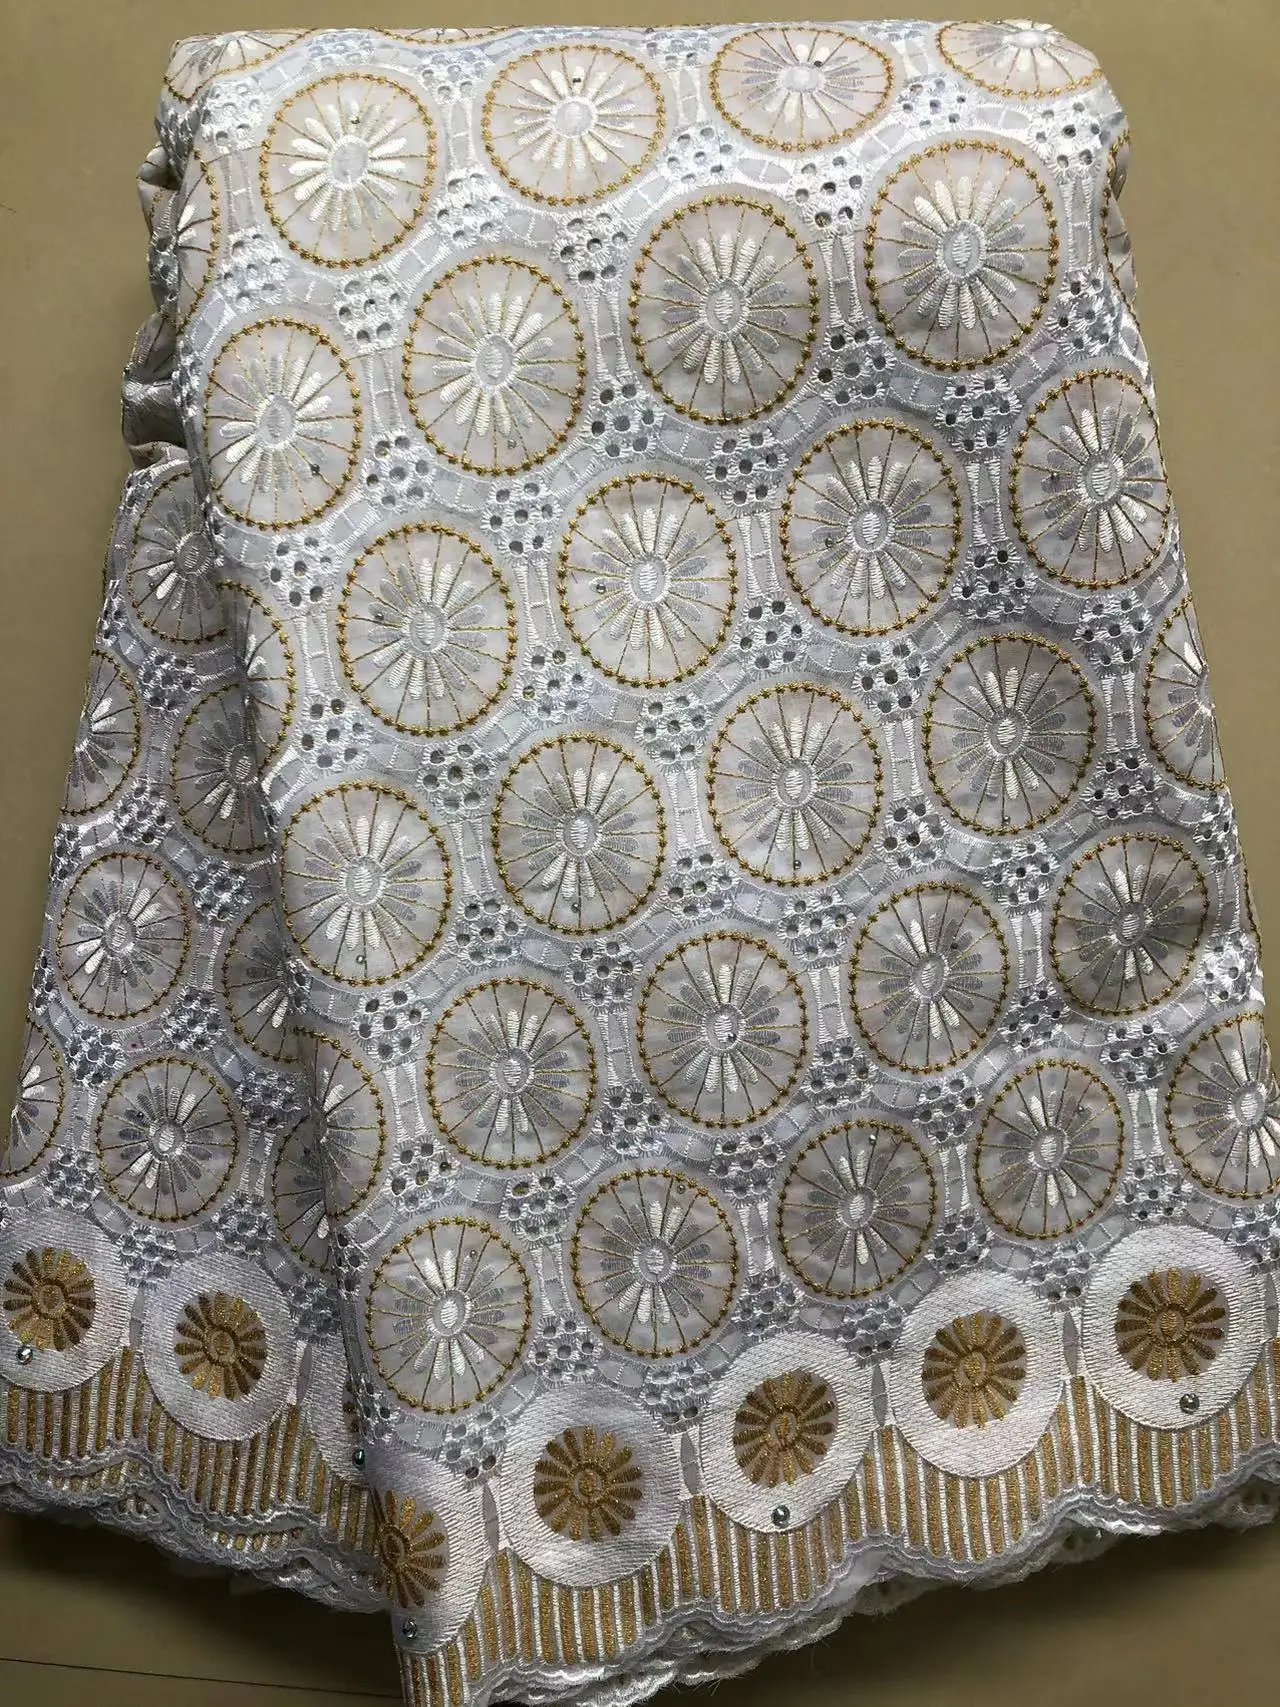 African Cotton Lace Fabric 2023 High Quality Swiss Voile Lace In Switzerland With Stones Nigerian Lace Fabrics For Wedding Dress gold african dry lace fabric pure cotton design swiss voile lace in switzerland high quality nigerian lace for wedding party tx8